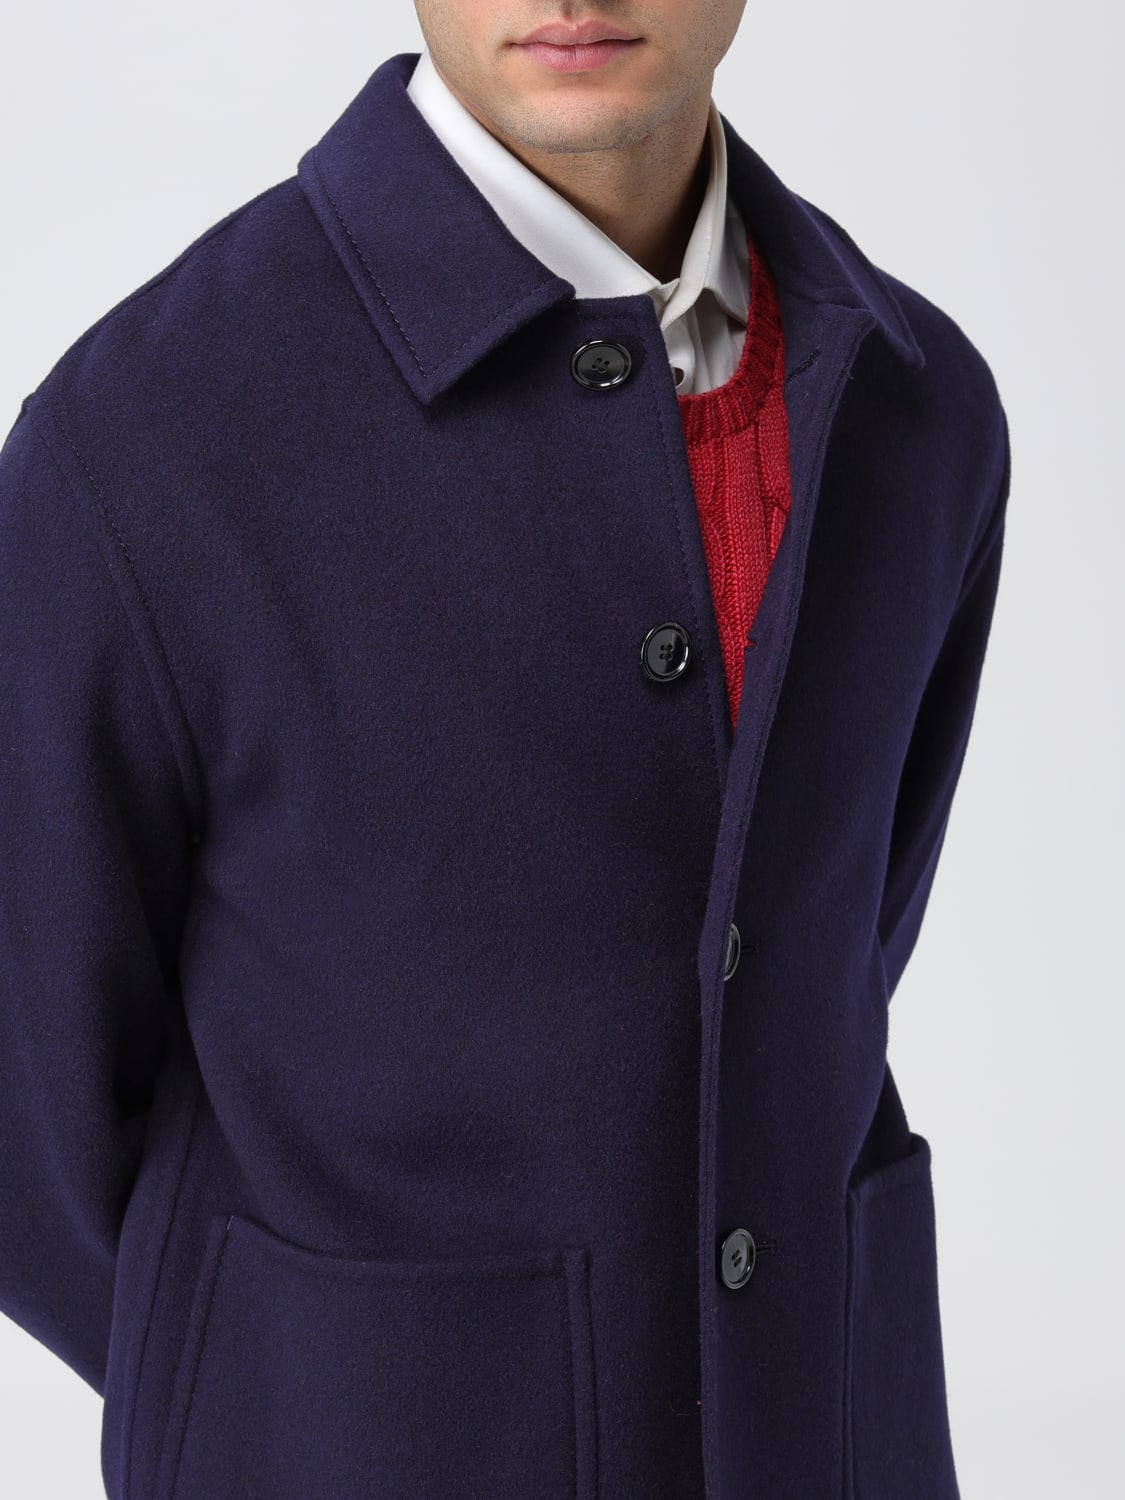 AMI Men's Two Button Wool Coat